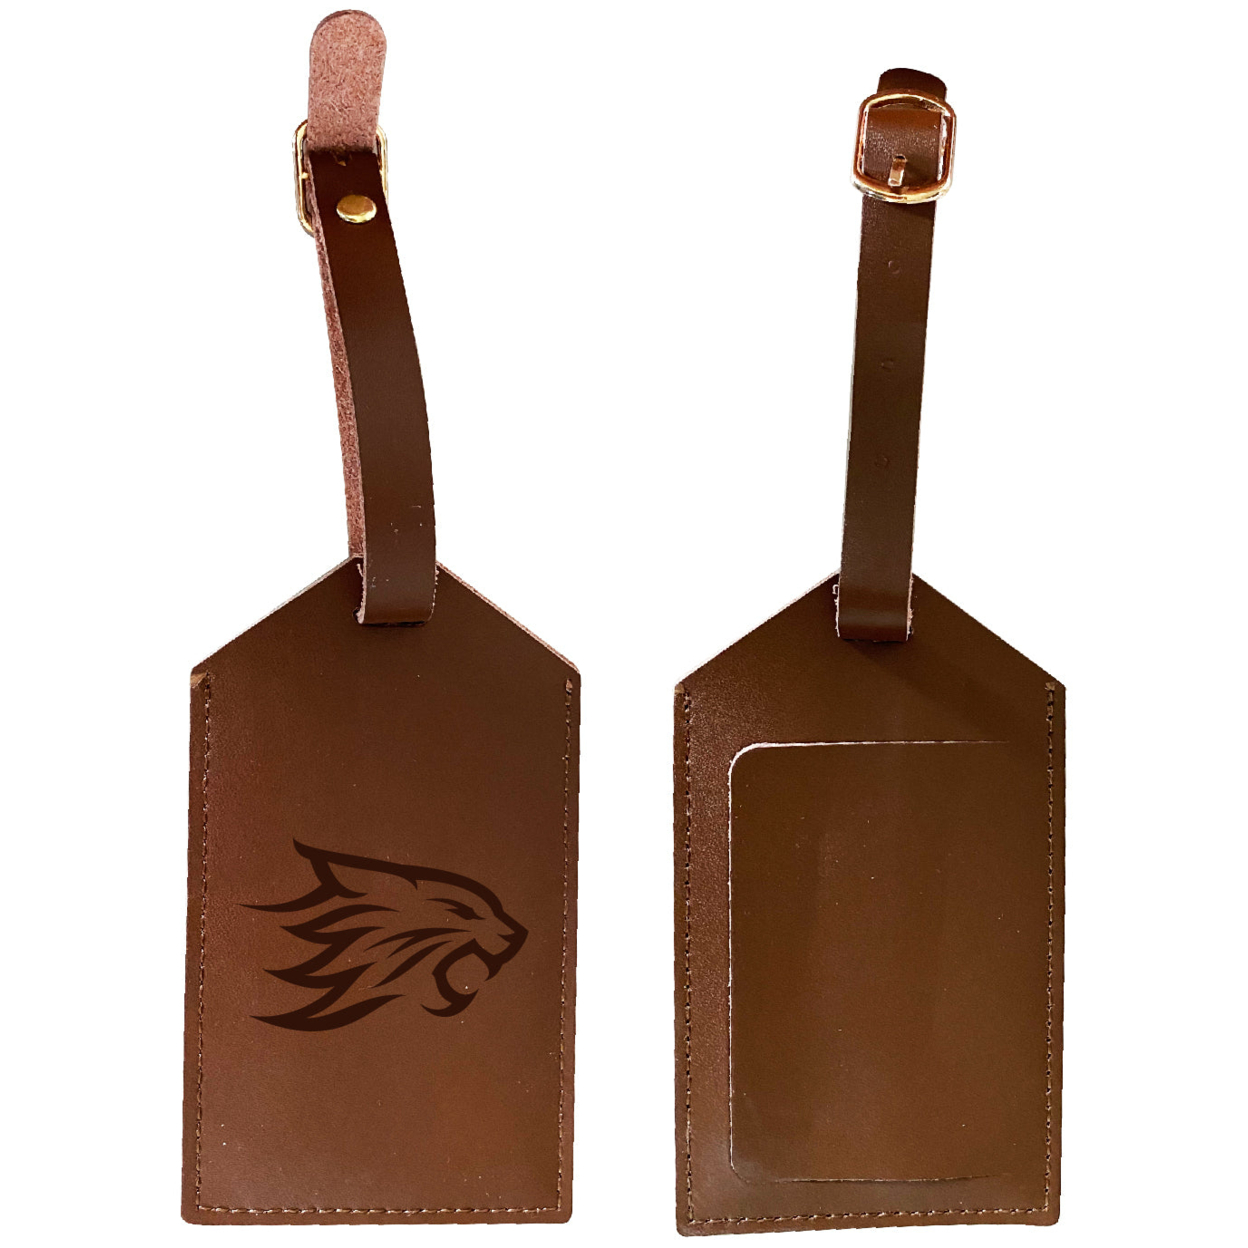 California State University, Chico Leather Luggage Tag Engraved